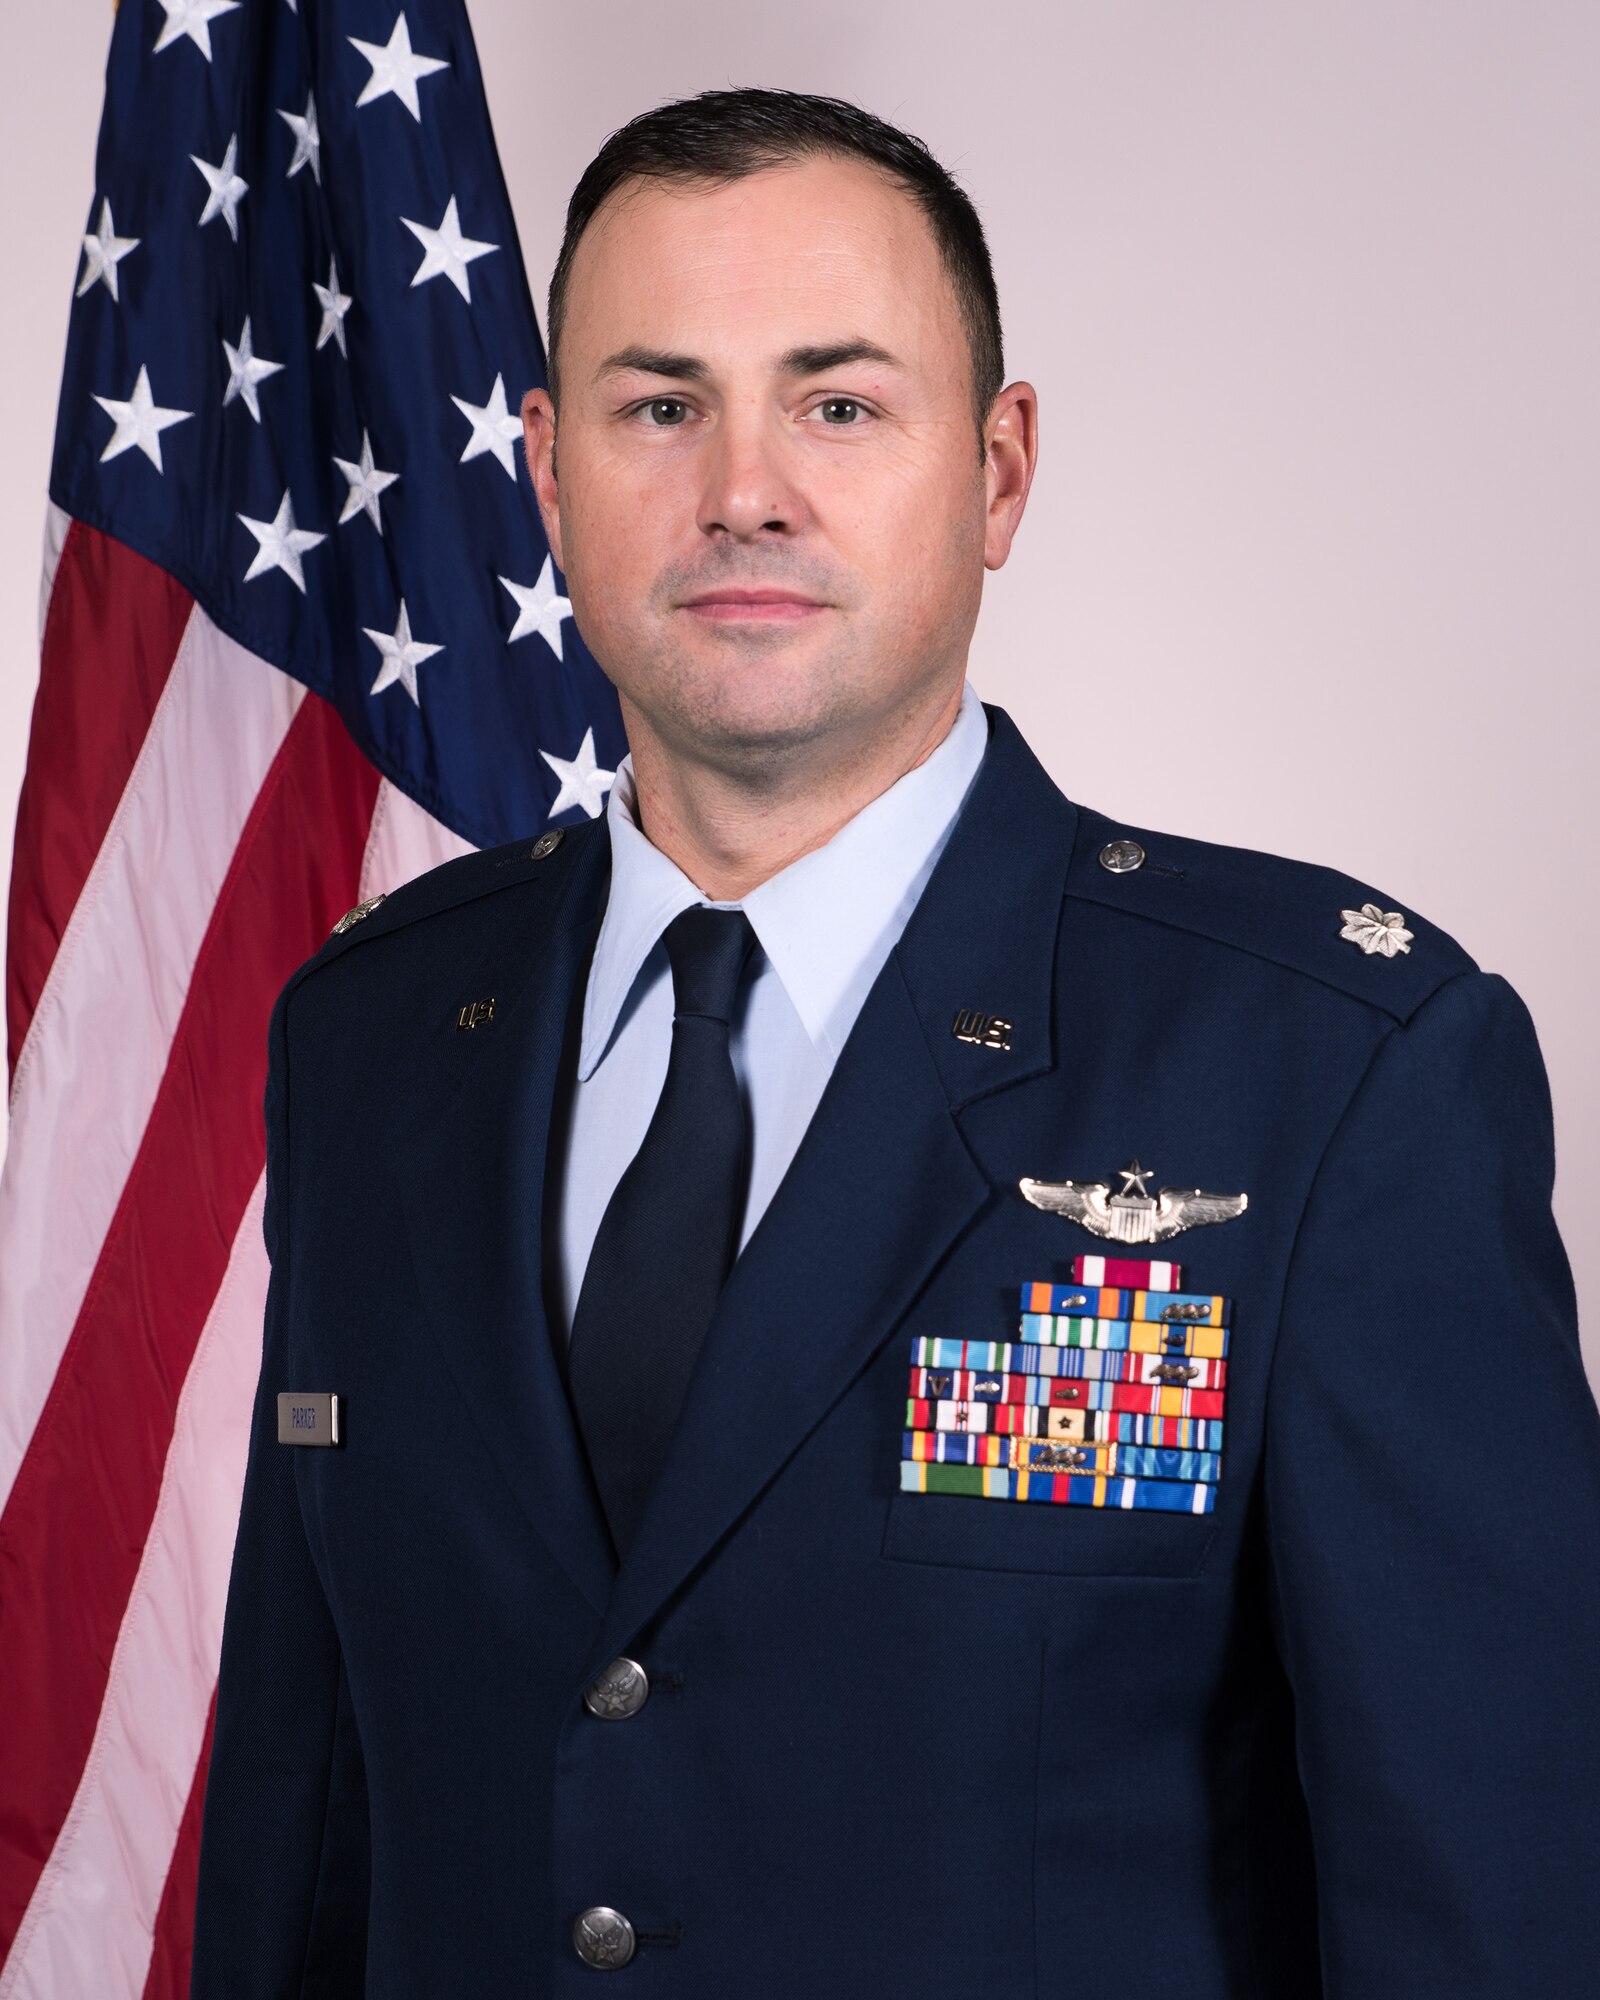 Lt Col Kipp Parker official Air Force photo standing in dress uniform with American flag.